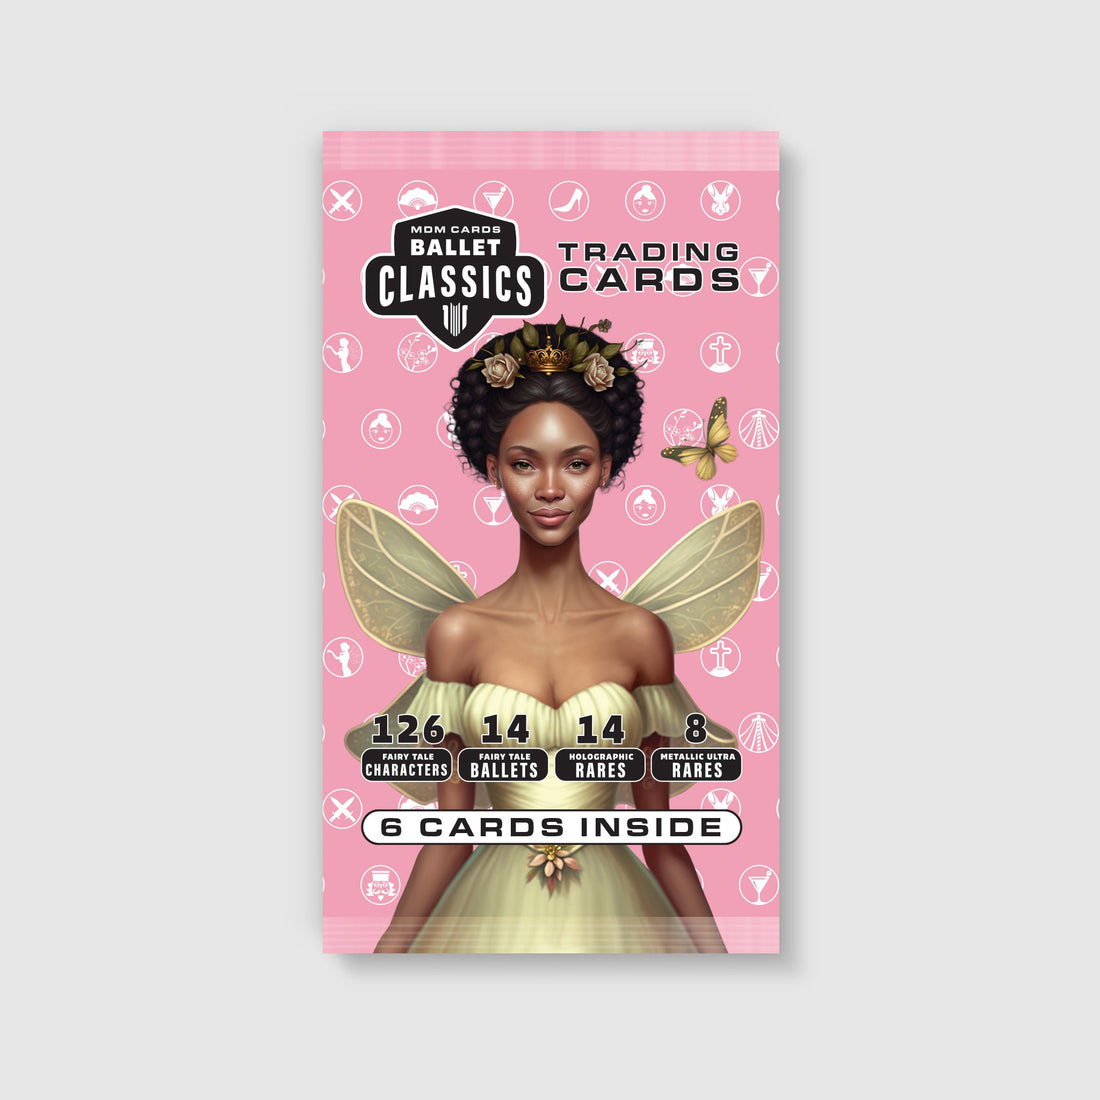 MDM Cards Ballet Classics - Single Booster Pack